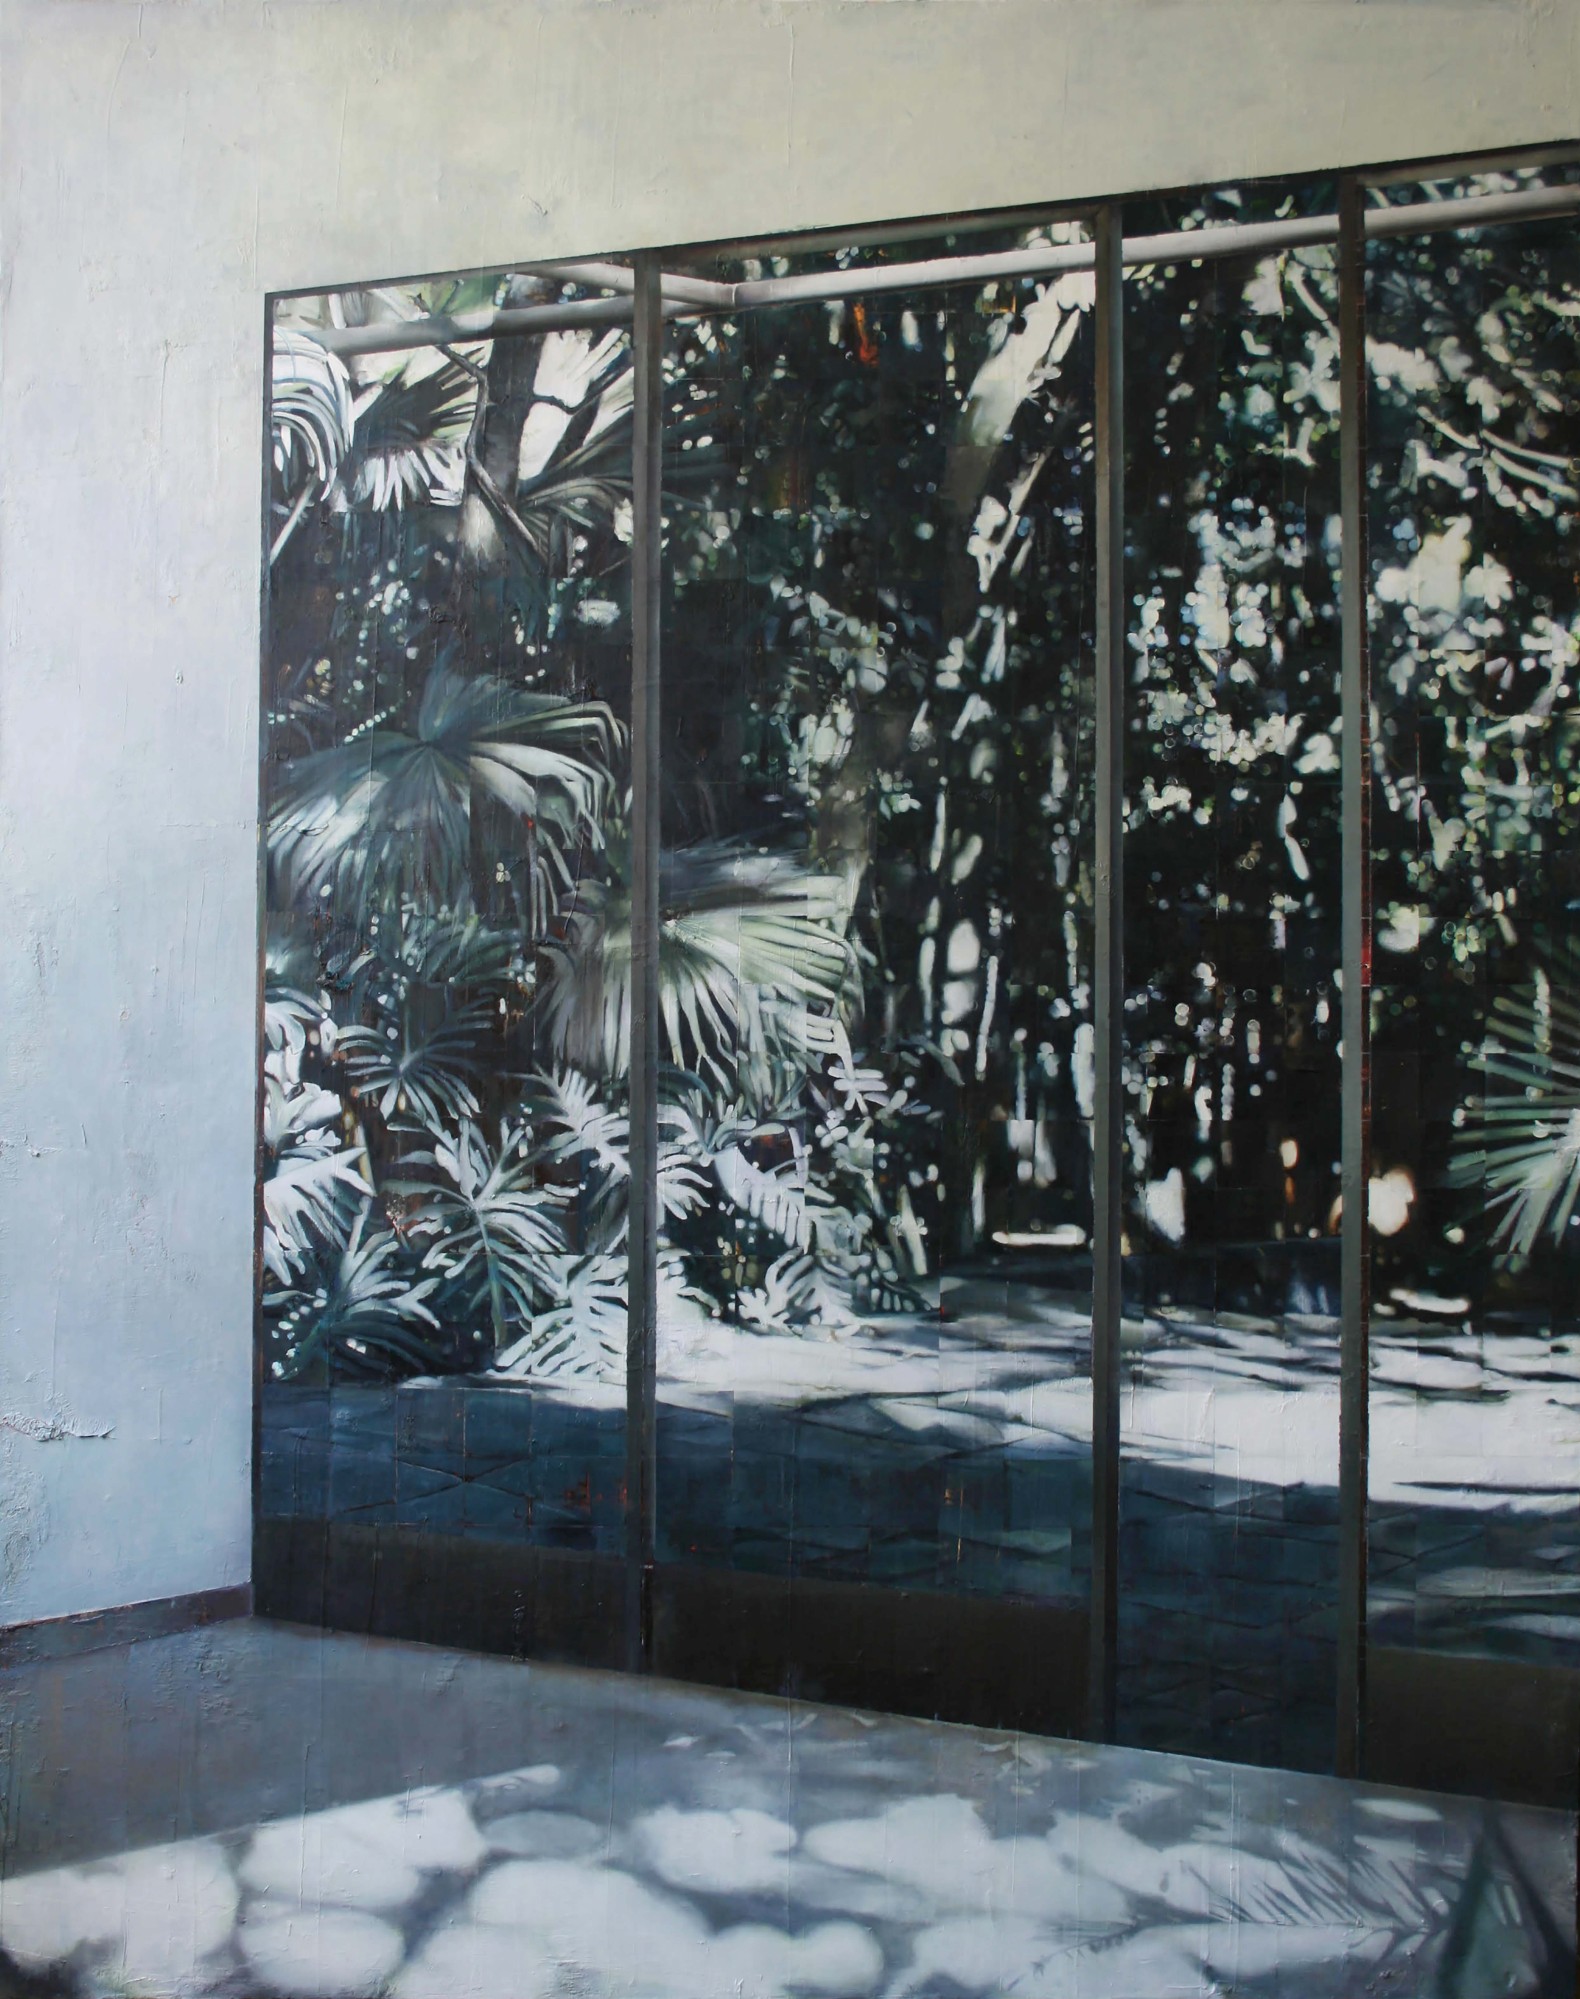 Refraction. 180 x 140 cm. Oil on canvas.